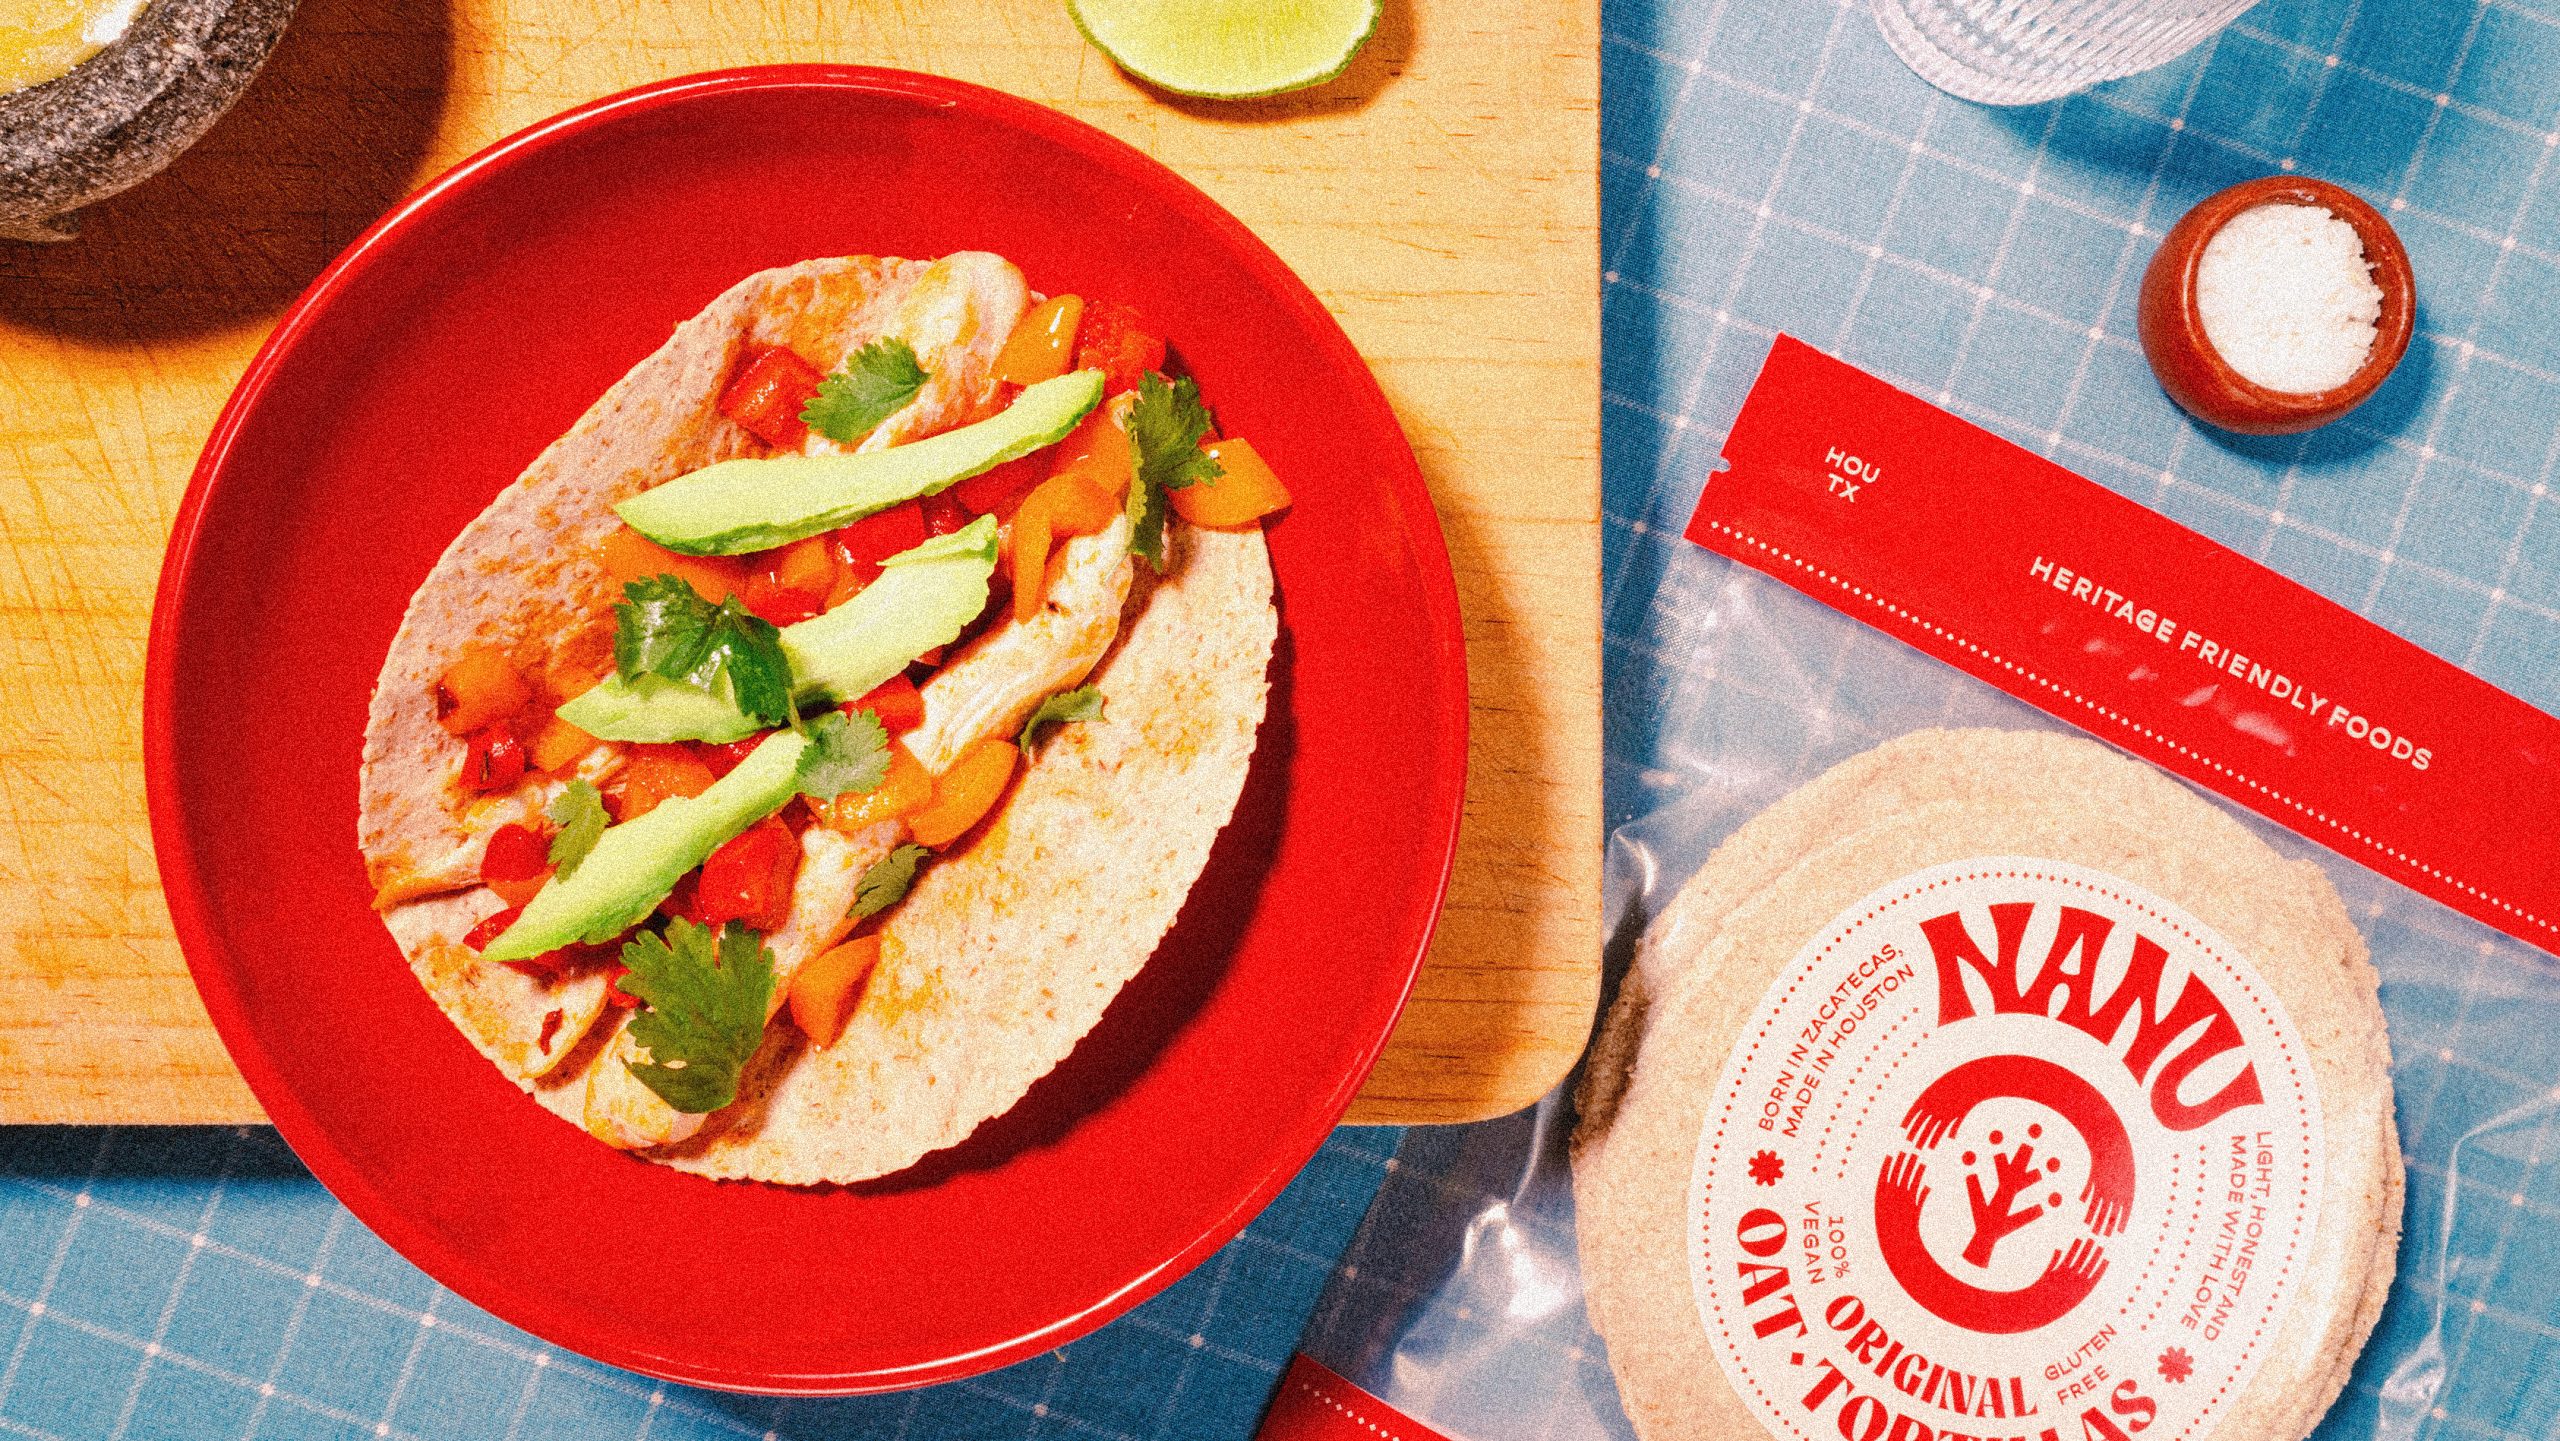 Nanu’s Stylish, Health-Conscious Mexican Food Prioritizes Authenticity and Tradition